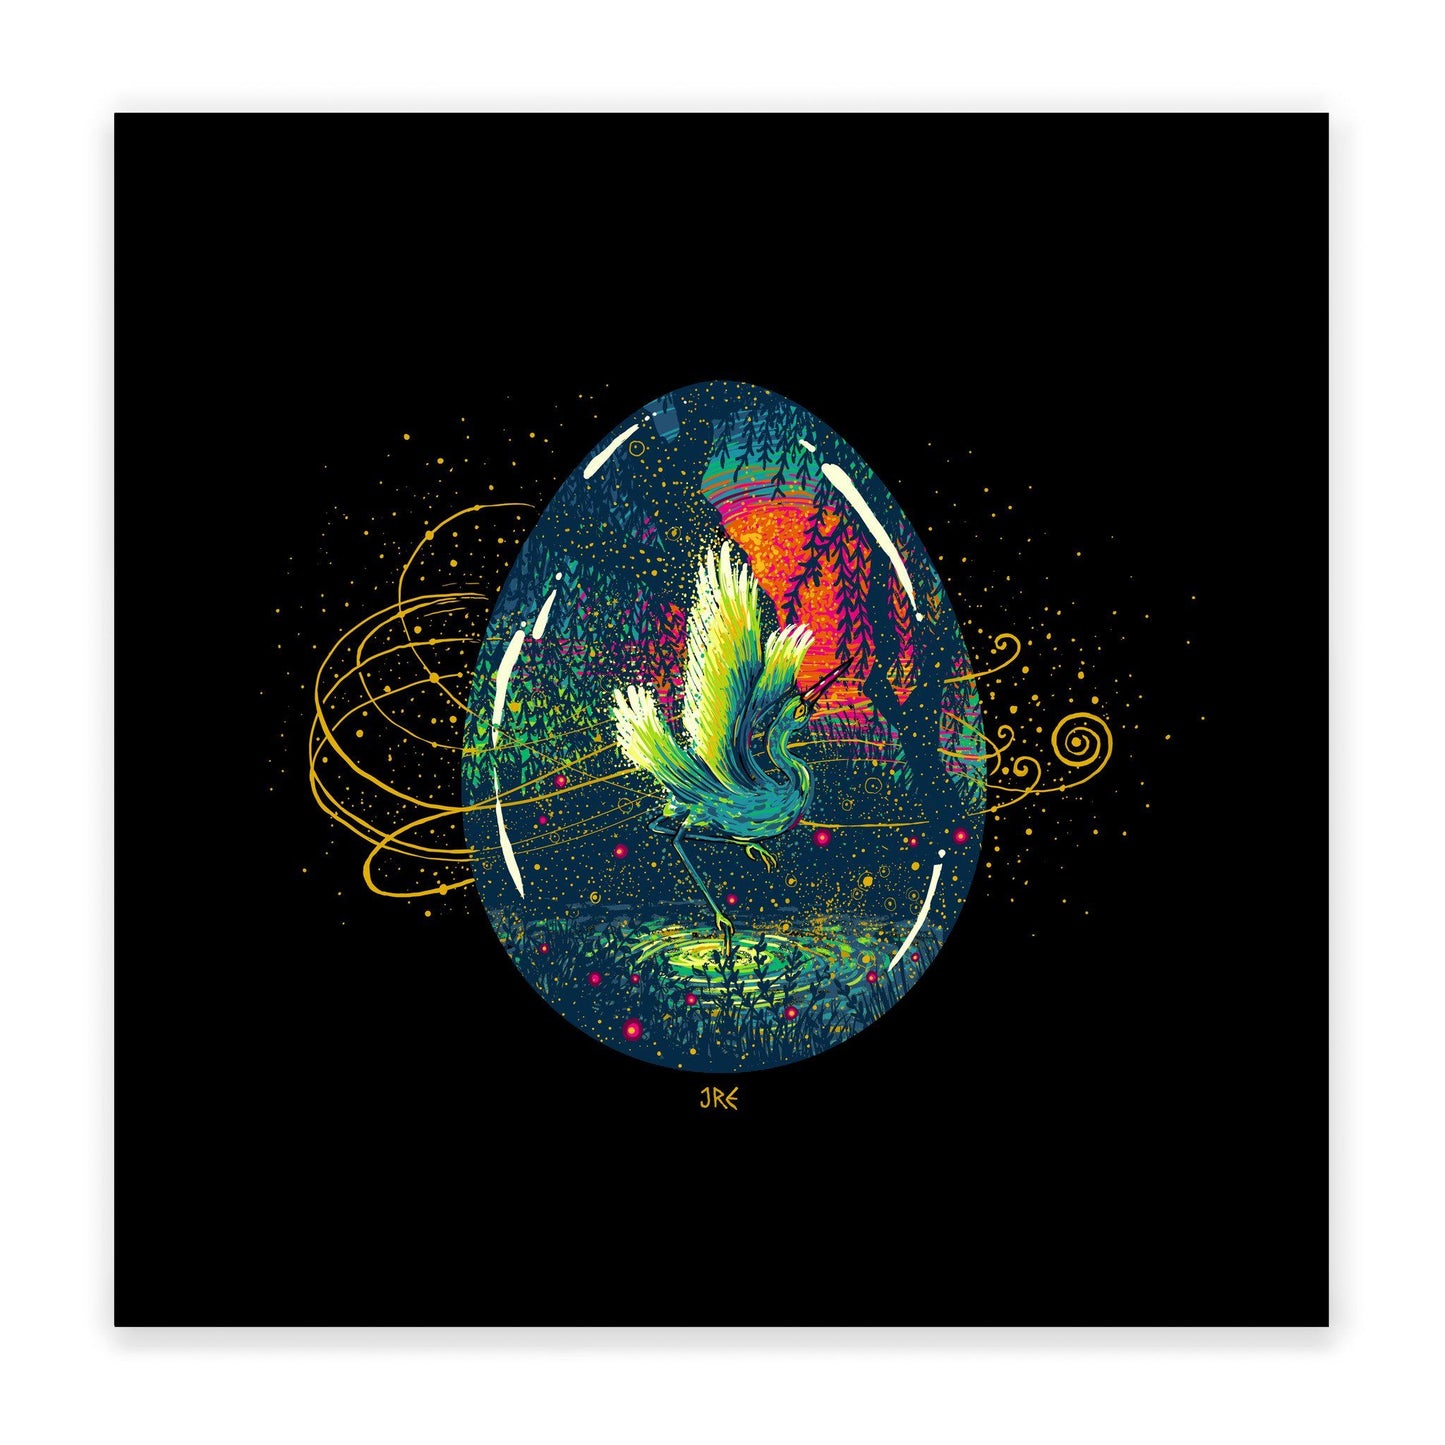 Golden Egg No. 10: The Reason for Greatness James R. Eads